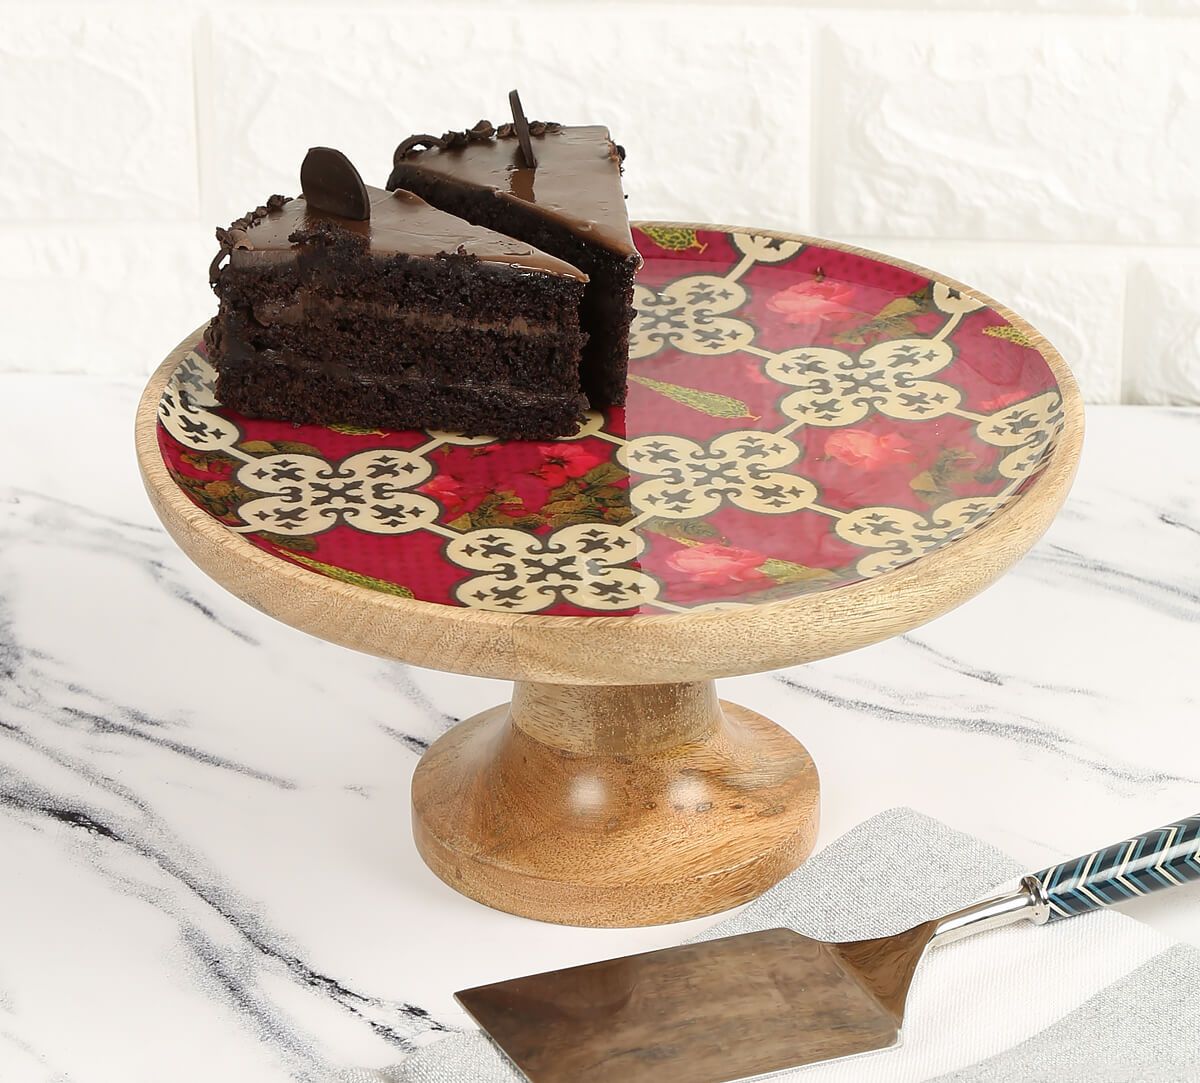 Clover's Knotty Play Cake Stand